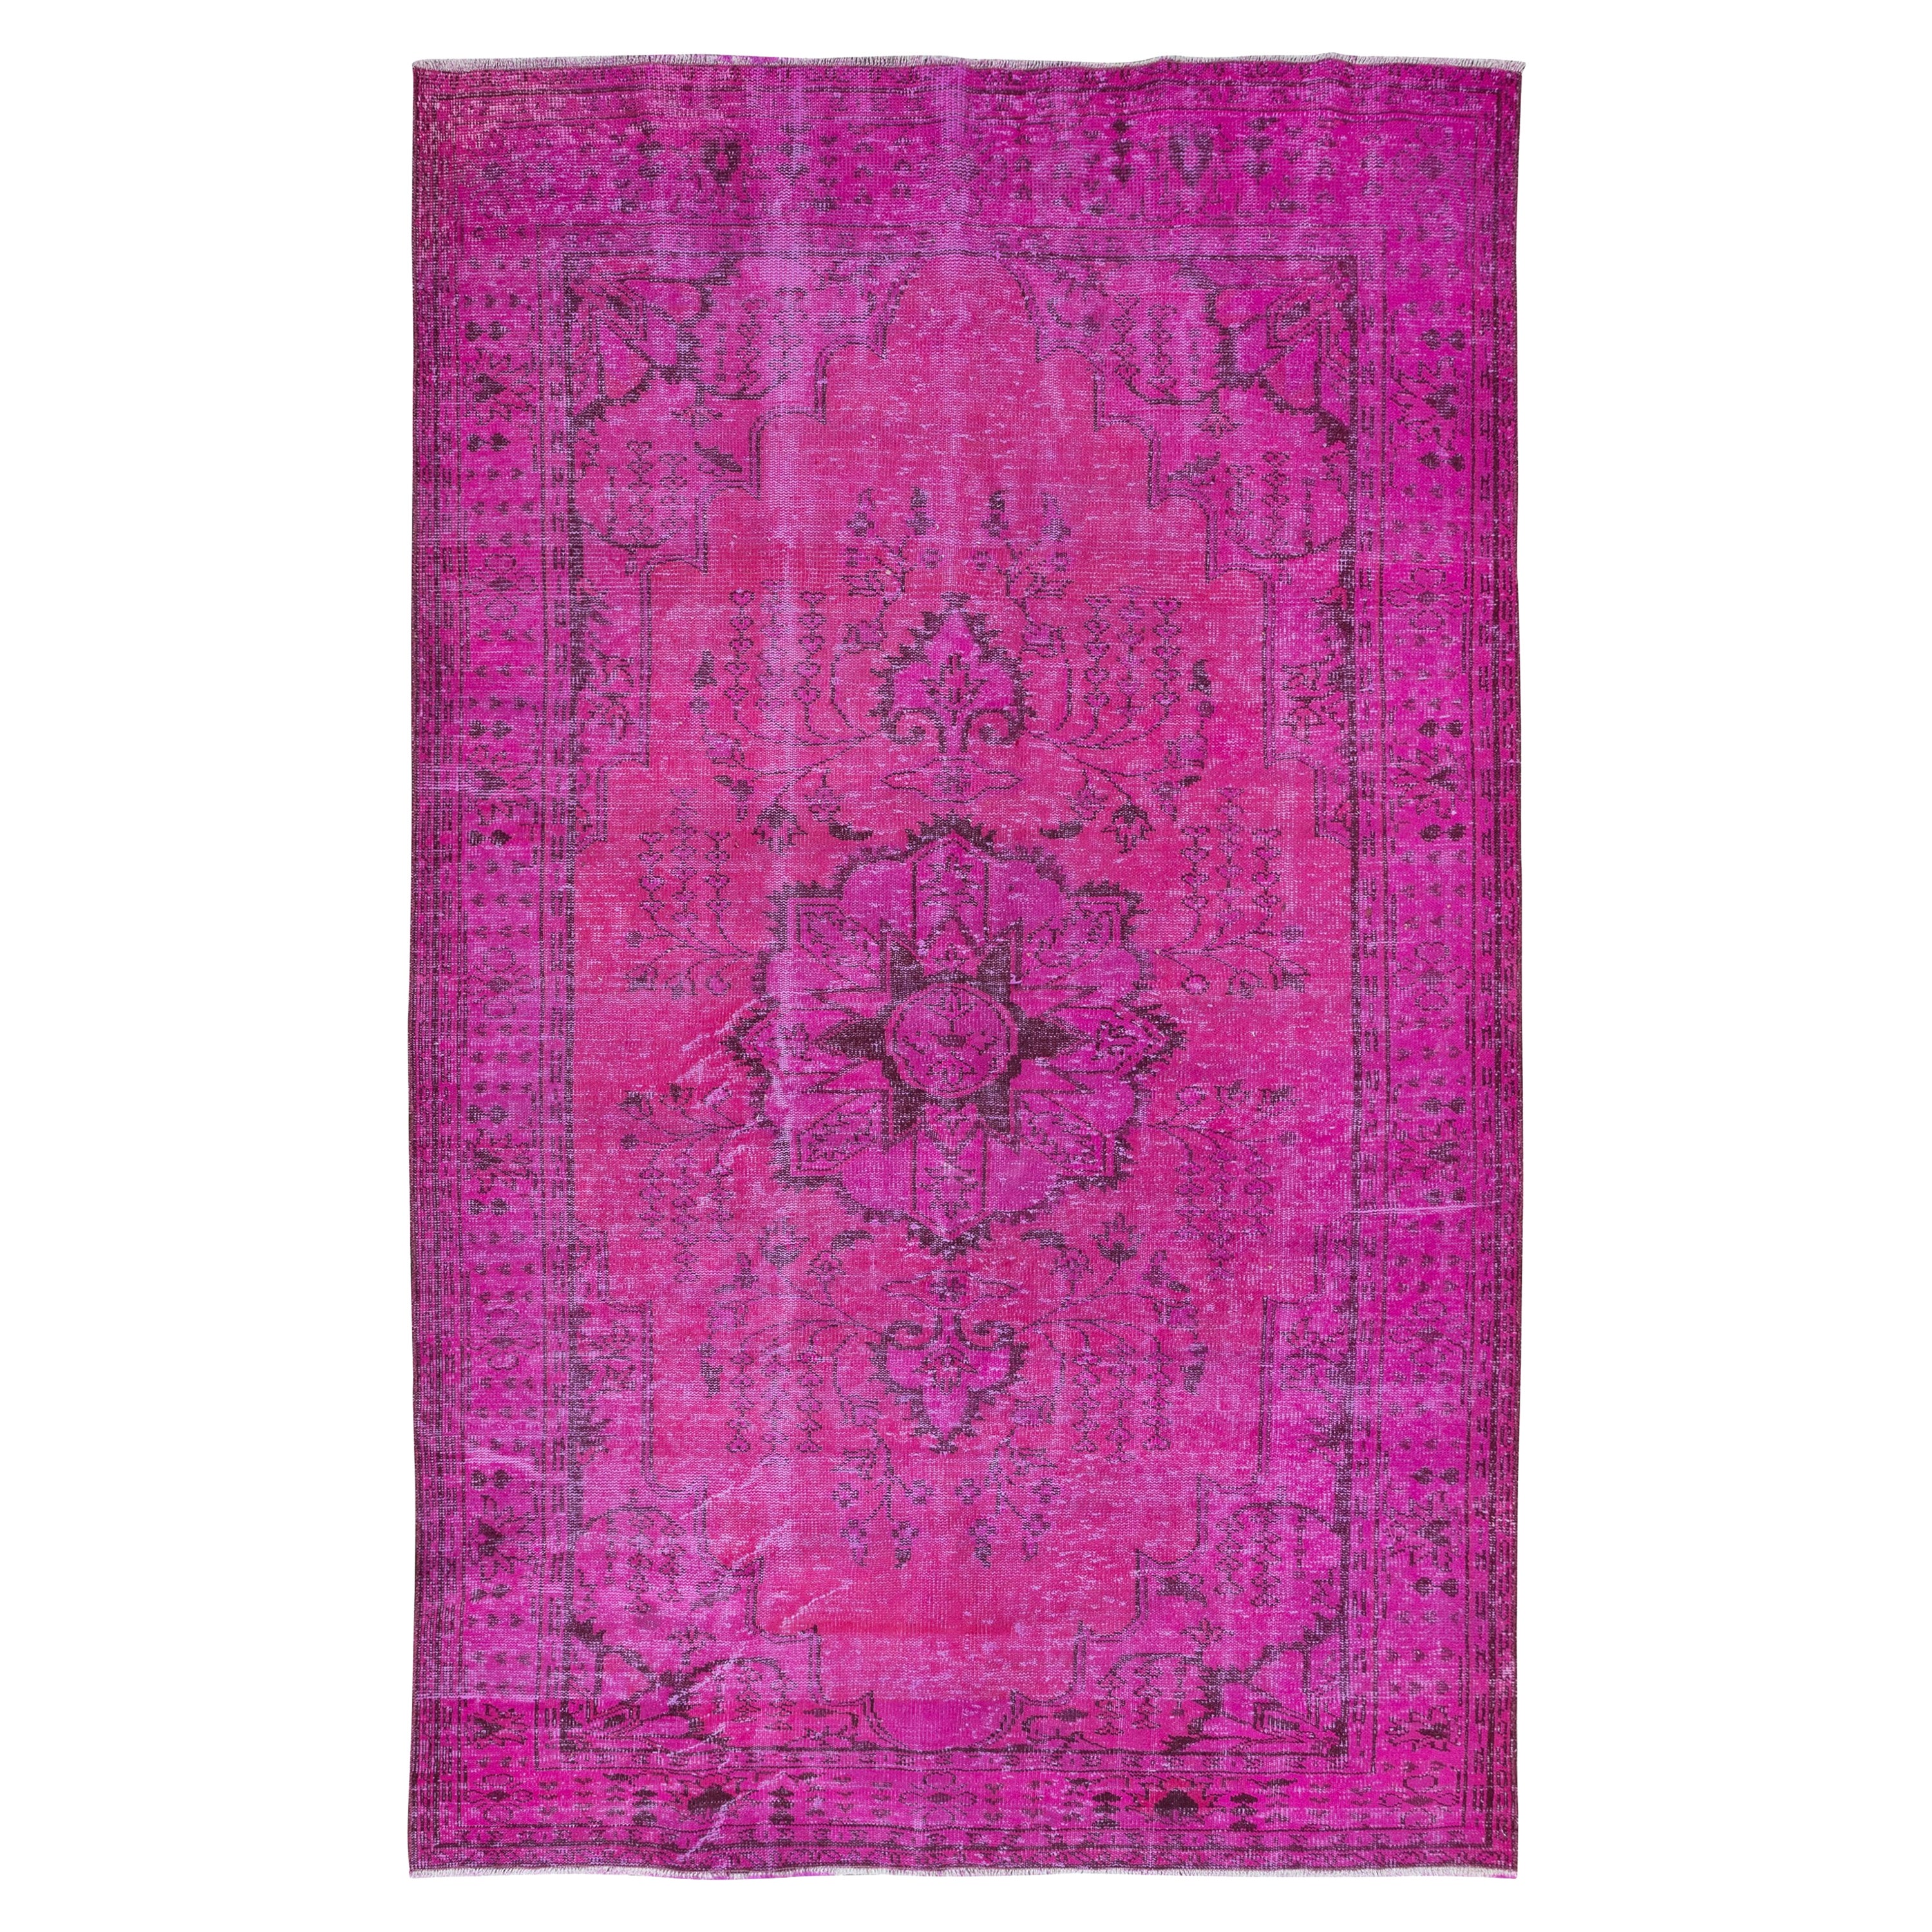 6x9.7 Ft Hand-Made Turkish Area Rug in Pink, Modern Wool and Cotton Carpet For Sale